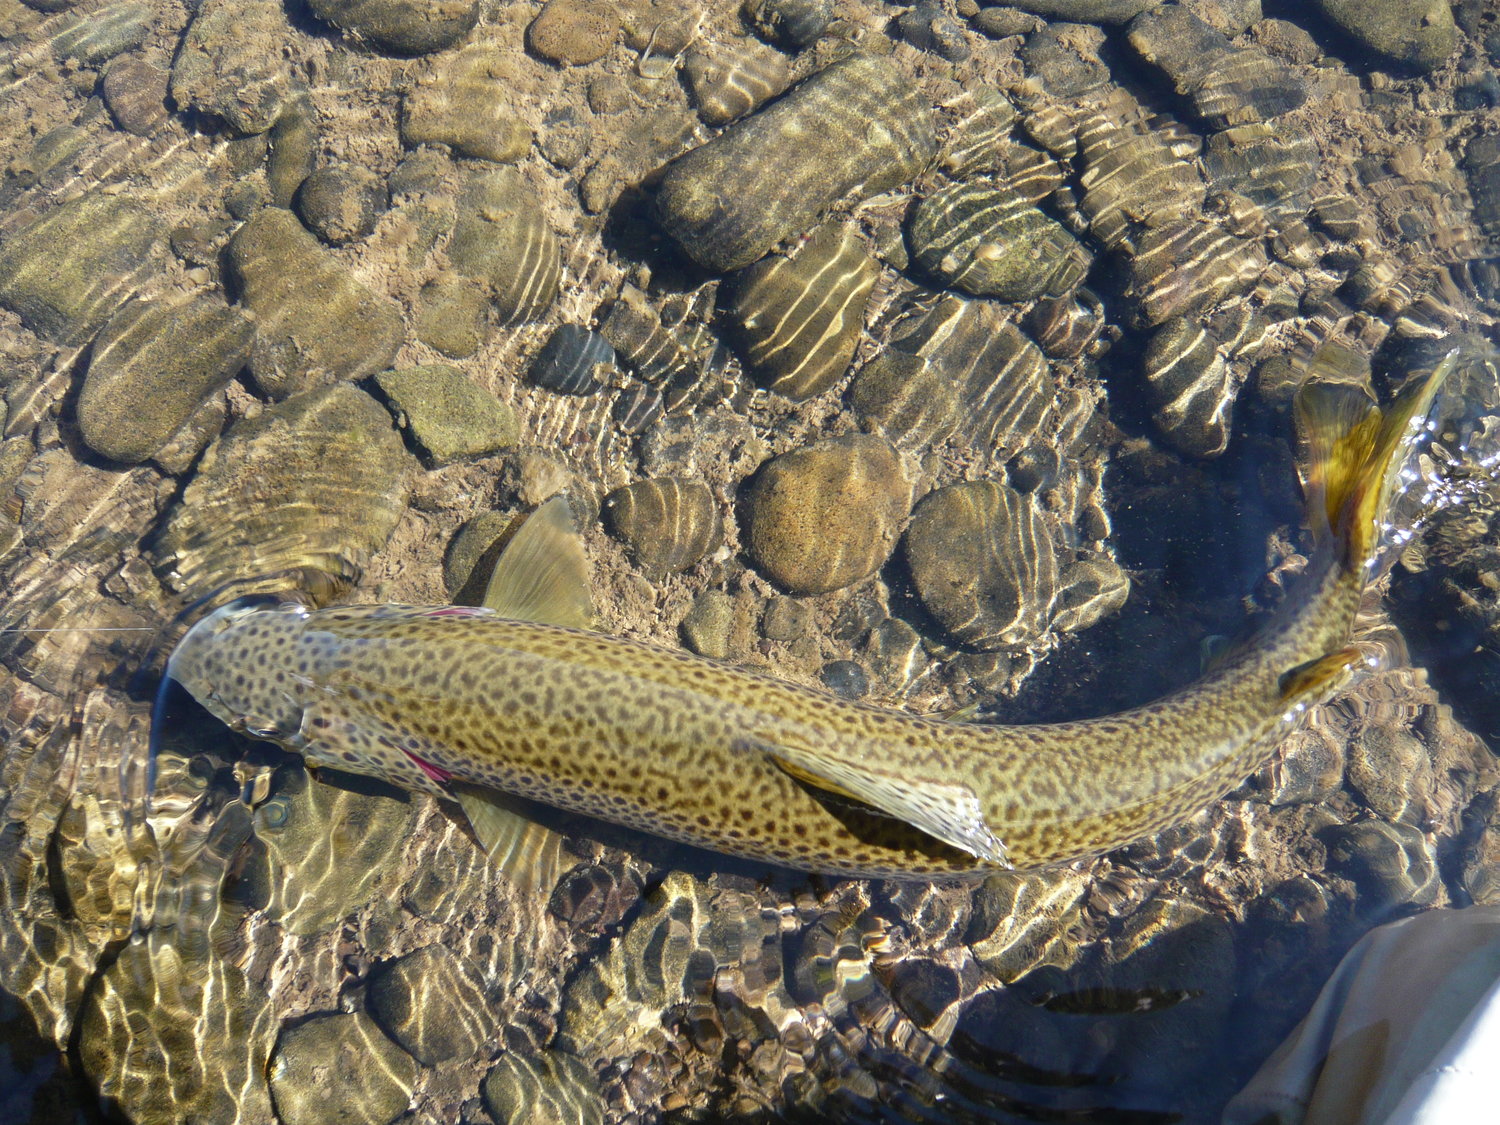 A nice brown trout ready to be netted.